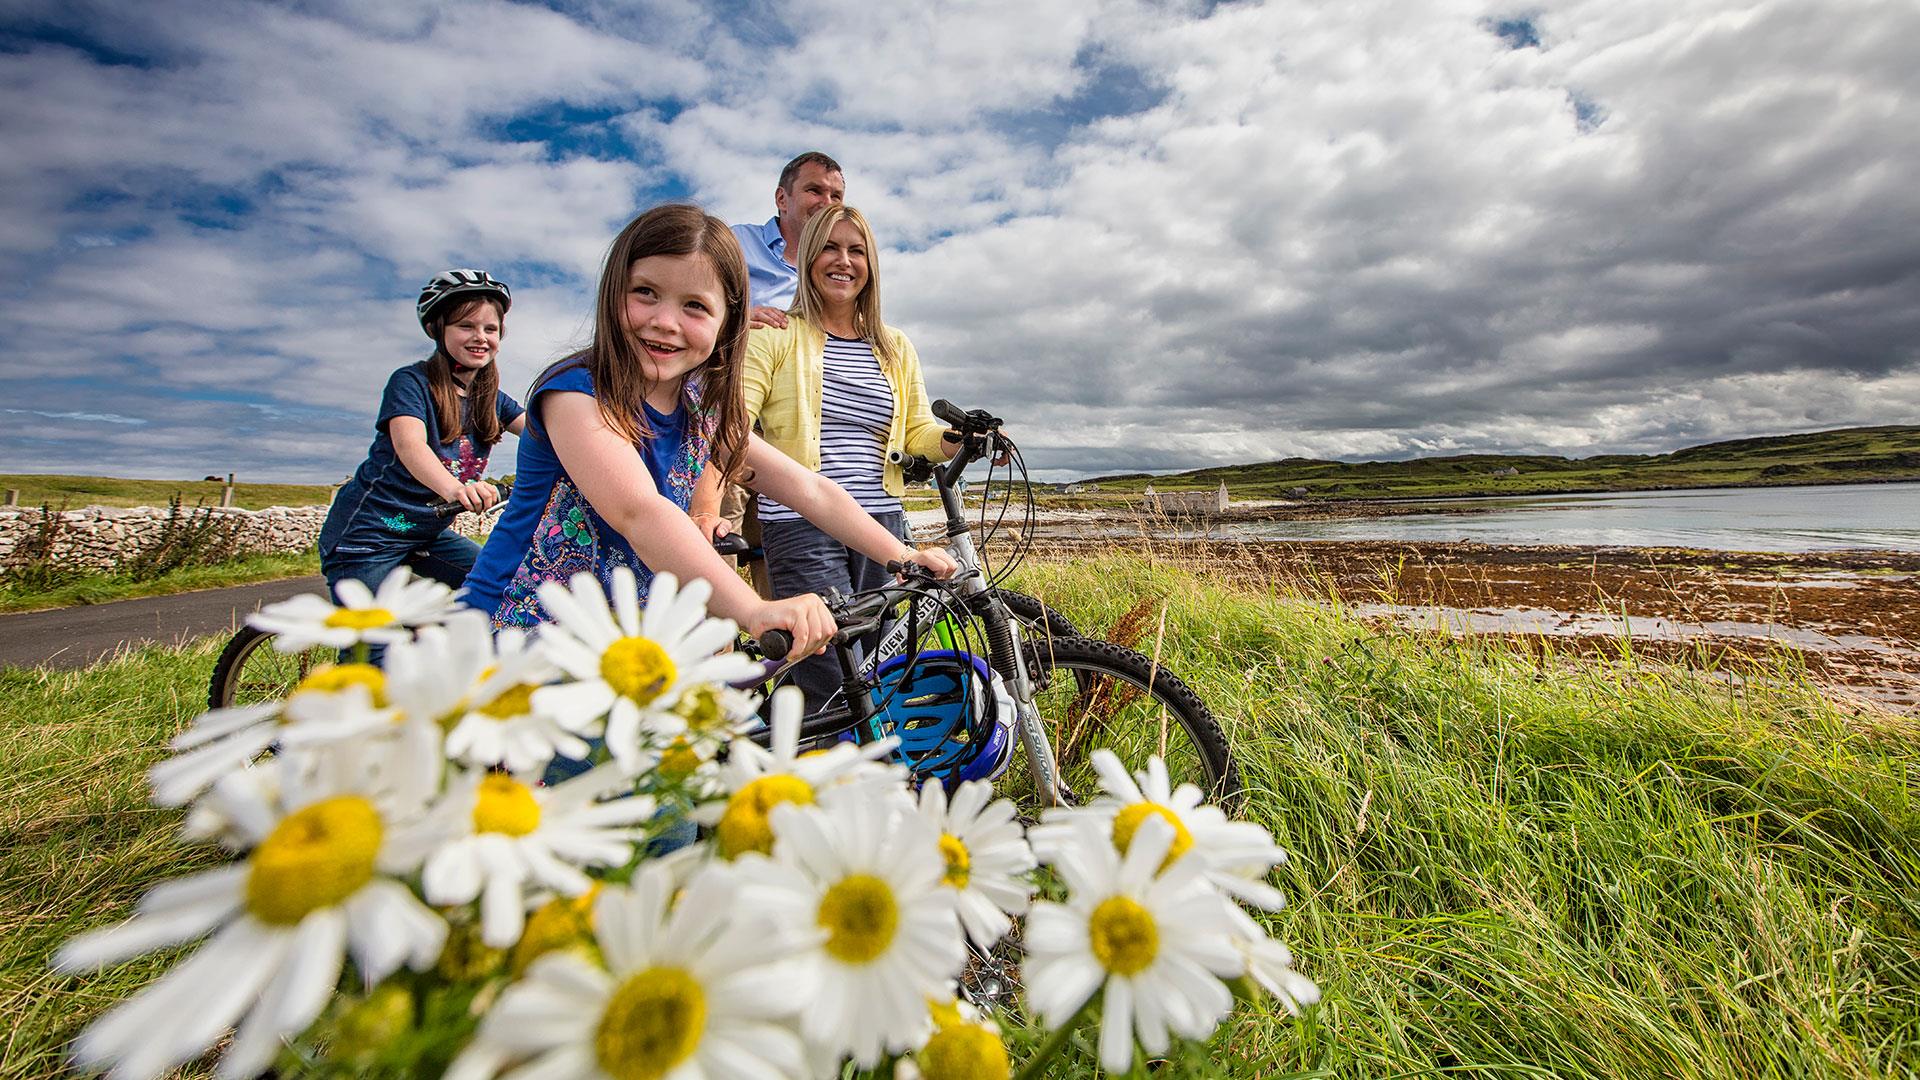 Family on bicycles enjoying the sunshine on Rathlin Island with daisies at the forefront of the image